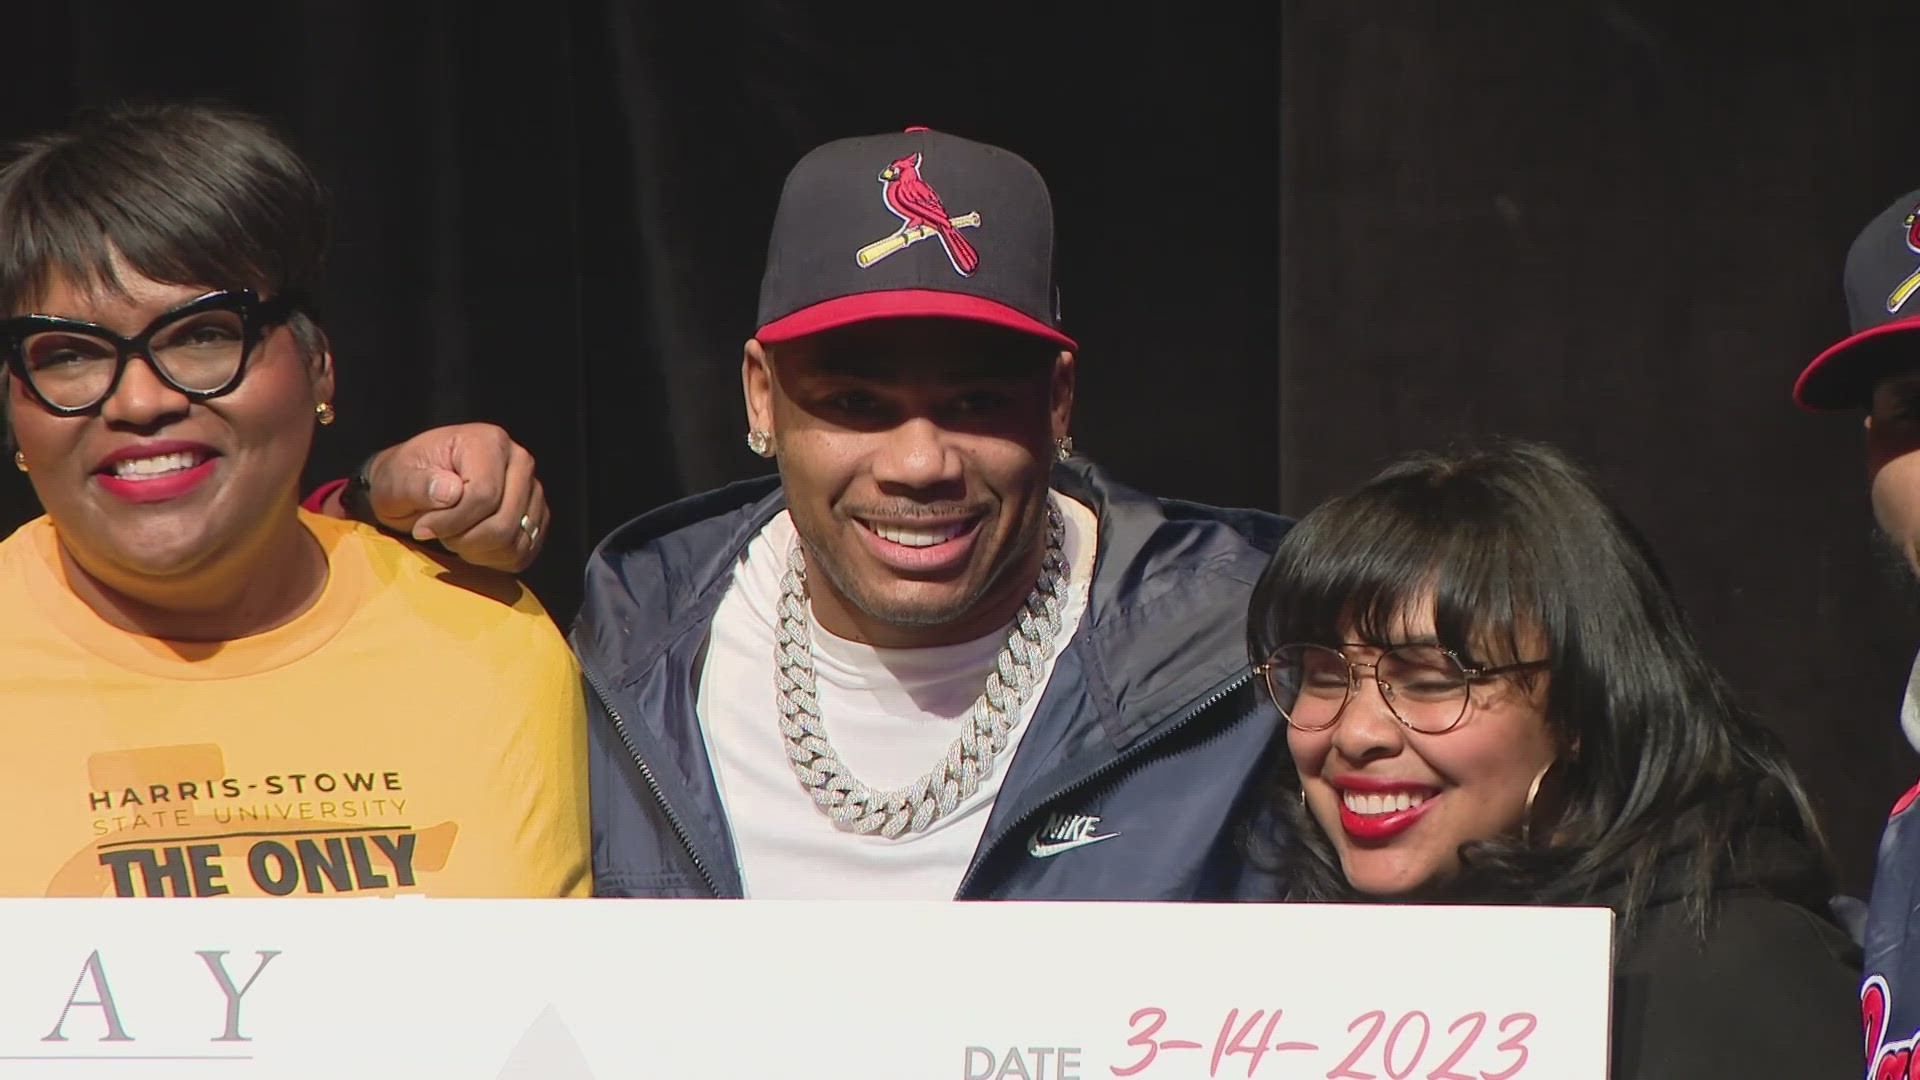 The Olympic-style tournament in St. Louis will include social, athletic and STEM competitions for cash prizes. Nelly announced the tournament on 314 Day.